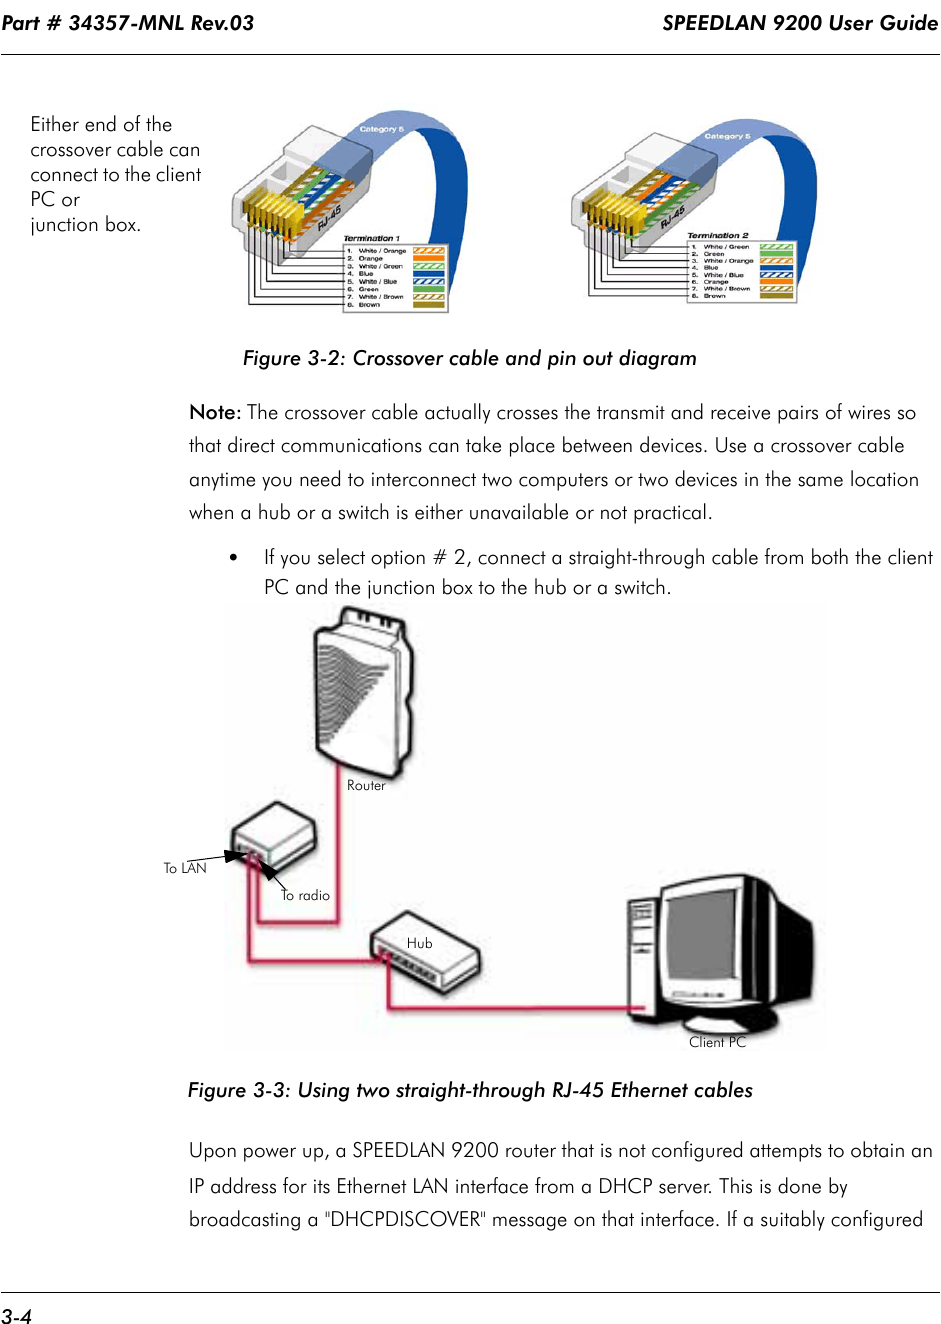 Part # 34357-MNL Rev.03                                                                   SPEEDLAN 9200 User Guide 3-4Figure 3-2: Crossover cable and pin out diagramNote: The crossover cable actually crosses the transmit and receive pairs of wires so that direct communications can take place between devices. Use a crossover cable anytime you need to interconnect two computers or two devices in the same location when a hub or a switch is either unavailable or not practical.•If you select option # 2, connect a straight-through cable from both the client PC and the junction box to the hub or a switch.Figure 3-3: Using two straight-through RJ-45 Ethernet cablesUpon power up, a SPEEDLAN 9200 router that is not configured attempts to obtain an IP address for its Ethernet LAN interface from a DHCP server. This is done by broadcasting a &quot;DHCPDISCOVER&quot; message on that interface. If a suitably configured Either end of the crossover cable can connect to the client PC or junction box.To  r a d i oTo L A NClient PCHubRouter